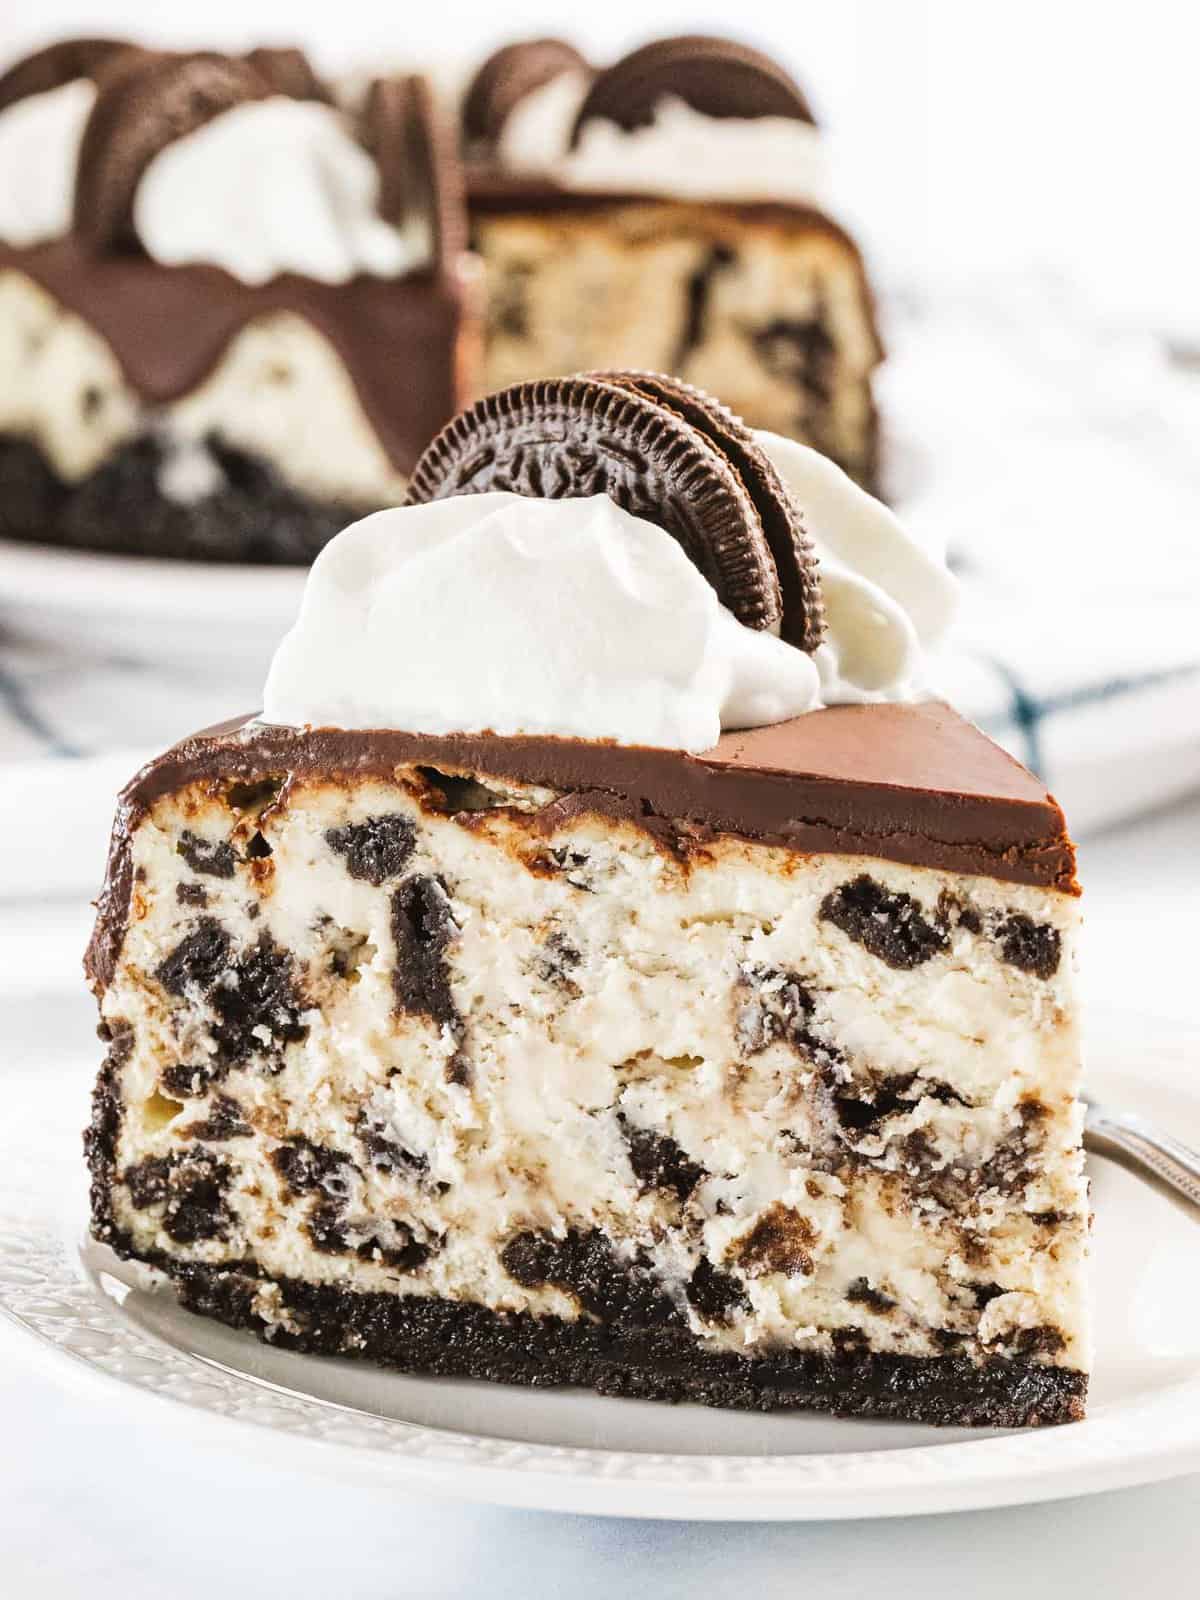 A slice of Oreo cheesecake with chocolate ganache and whipped cream.